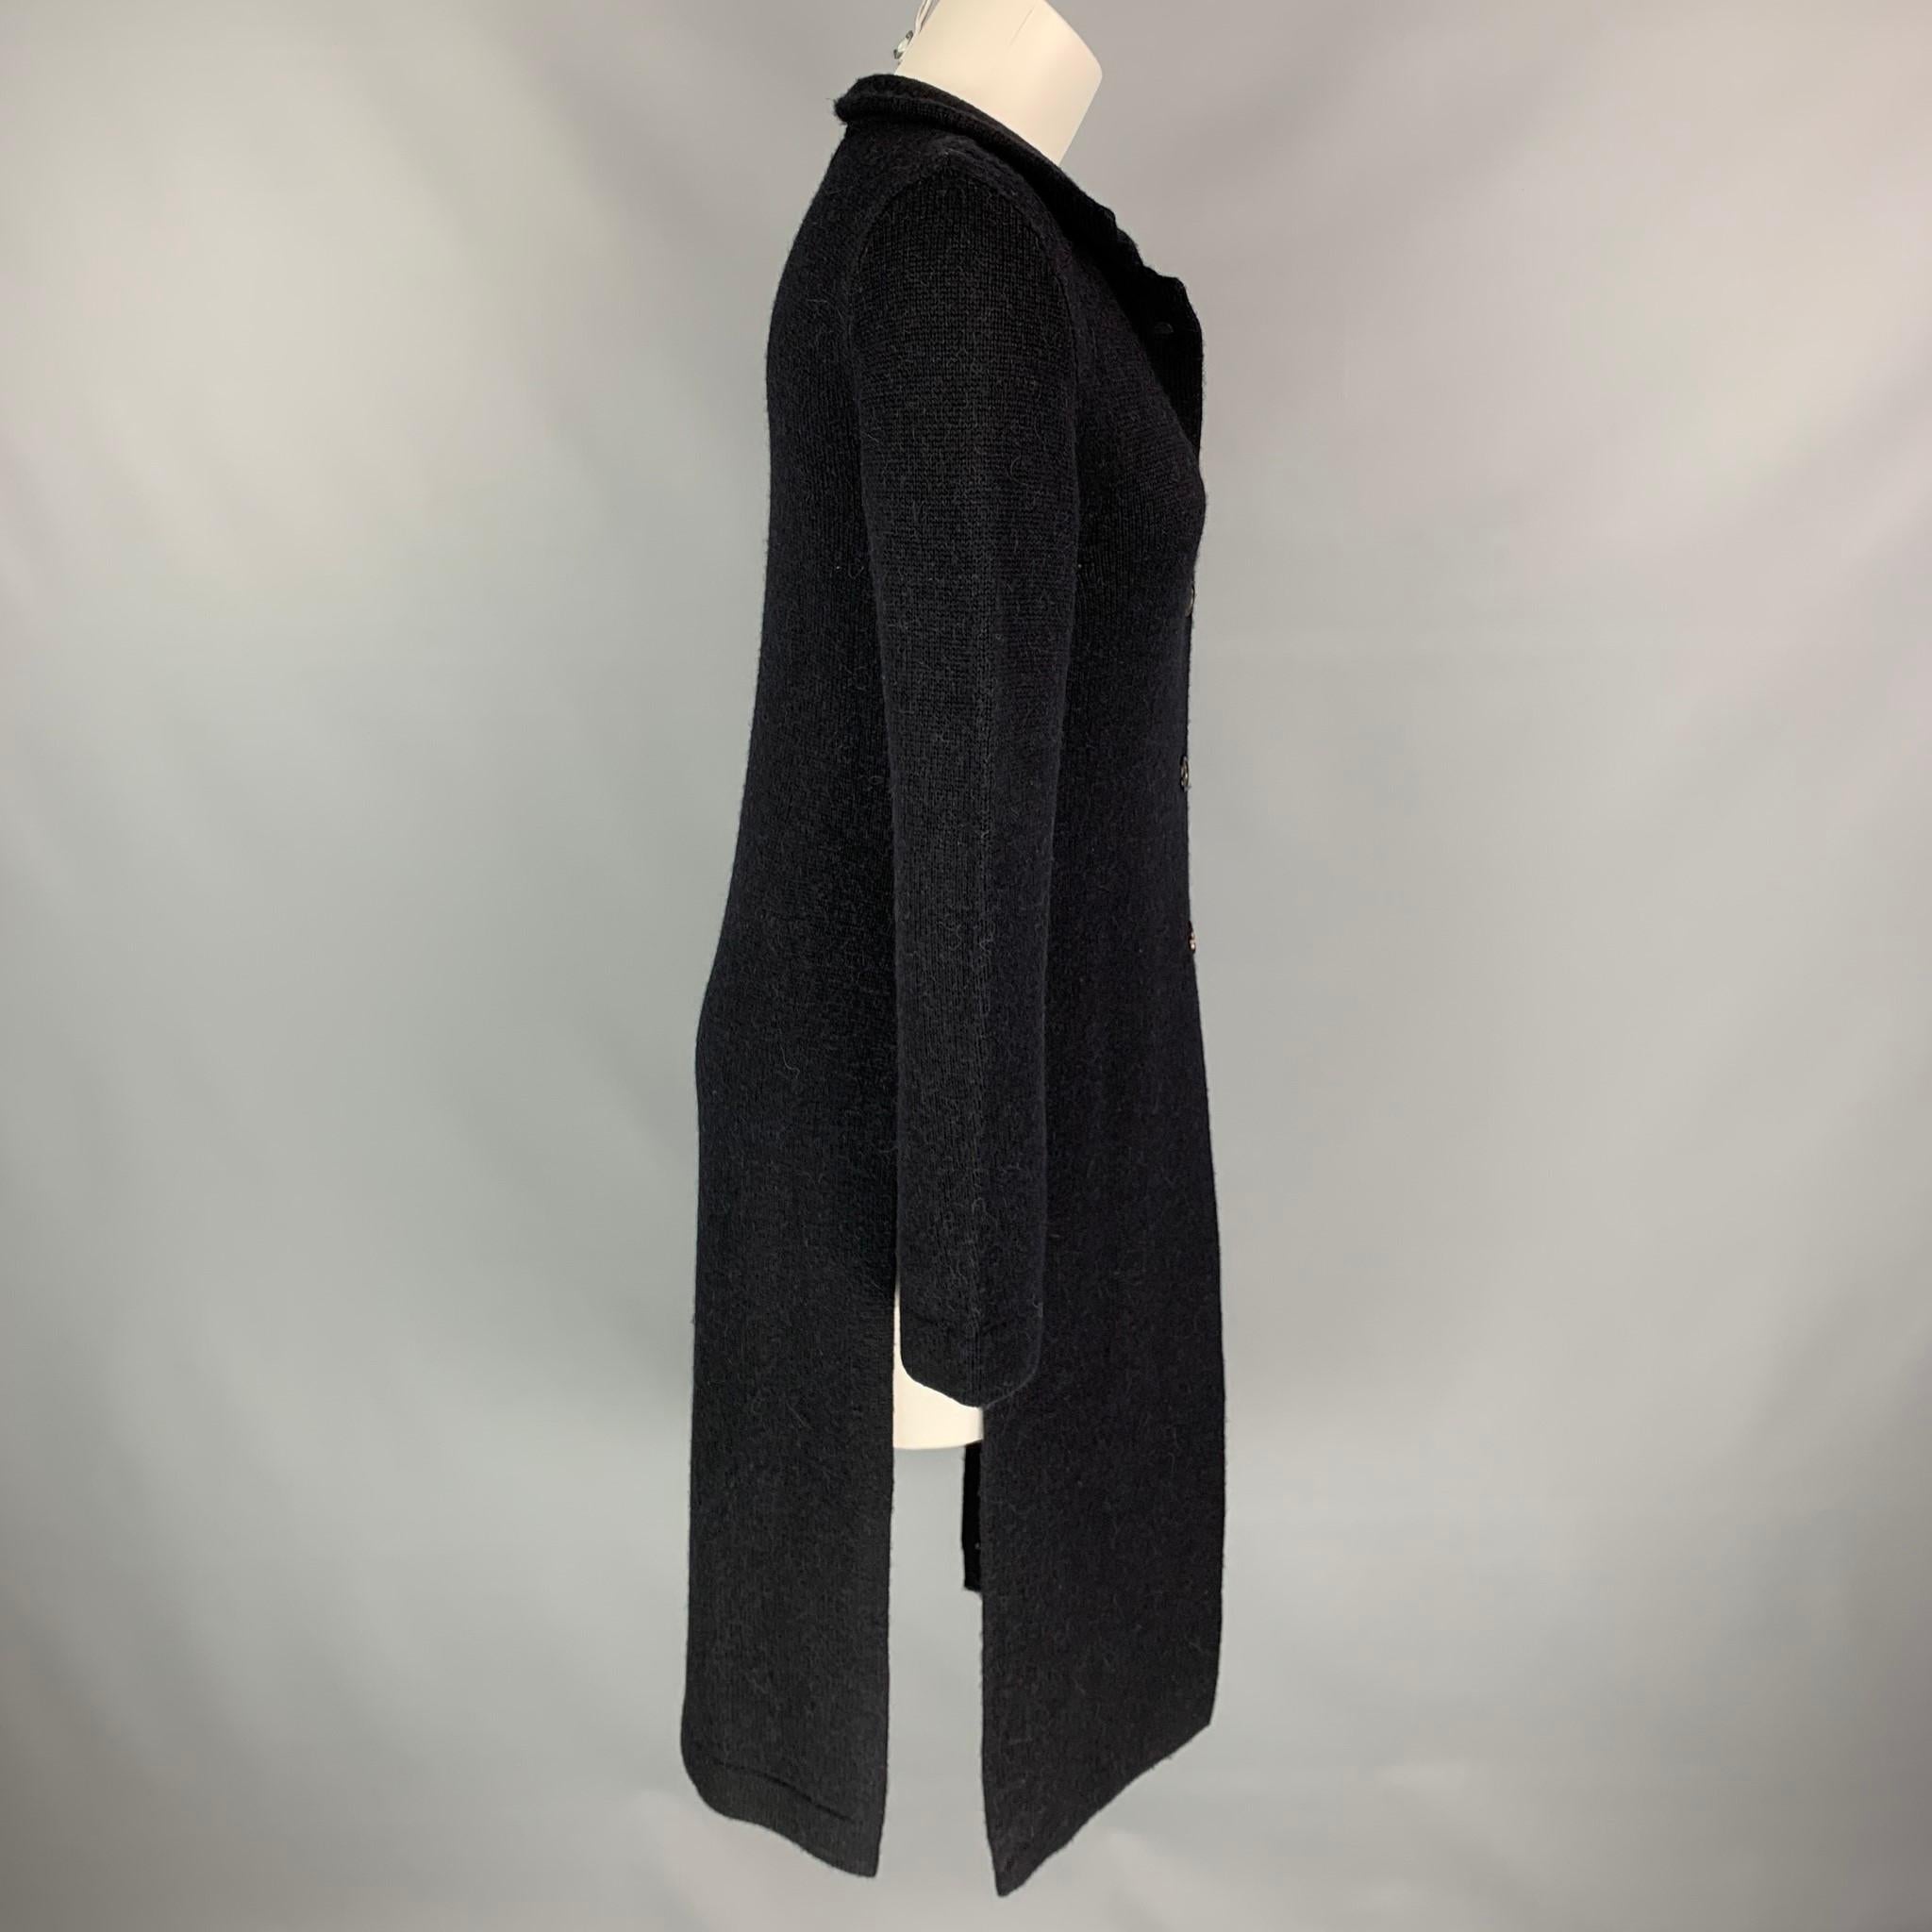 ANN DEMEULEMEESTER cardigan comes in a black knitted wool / alpaca featuring a side slits, spread collar, and a buttoned closure. Made in Belgium.

Very Good Pre-Owned Condition.
Marked: 36

Measurements:

Shoulder: 12.5 in.
Bust: 32 in.
Sleeve: 27